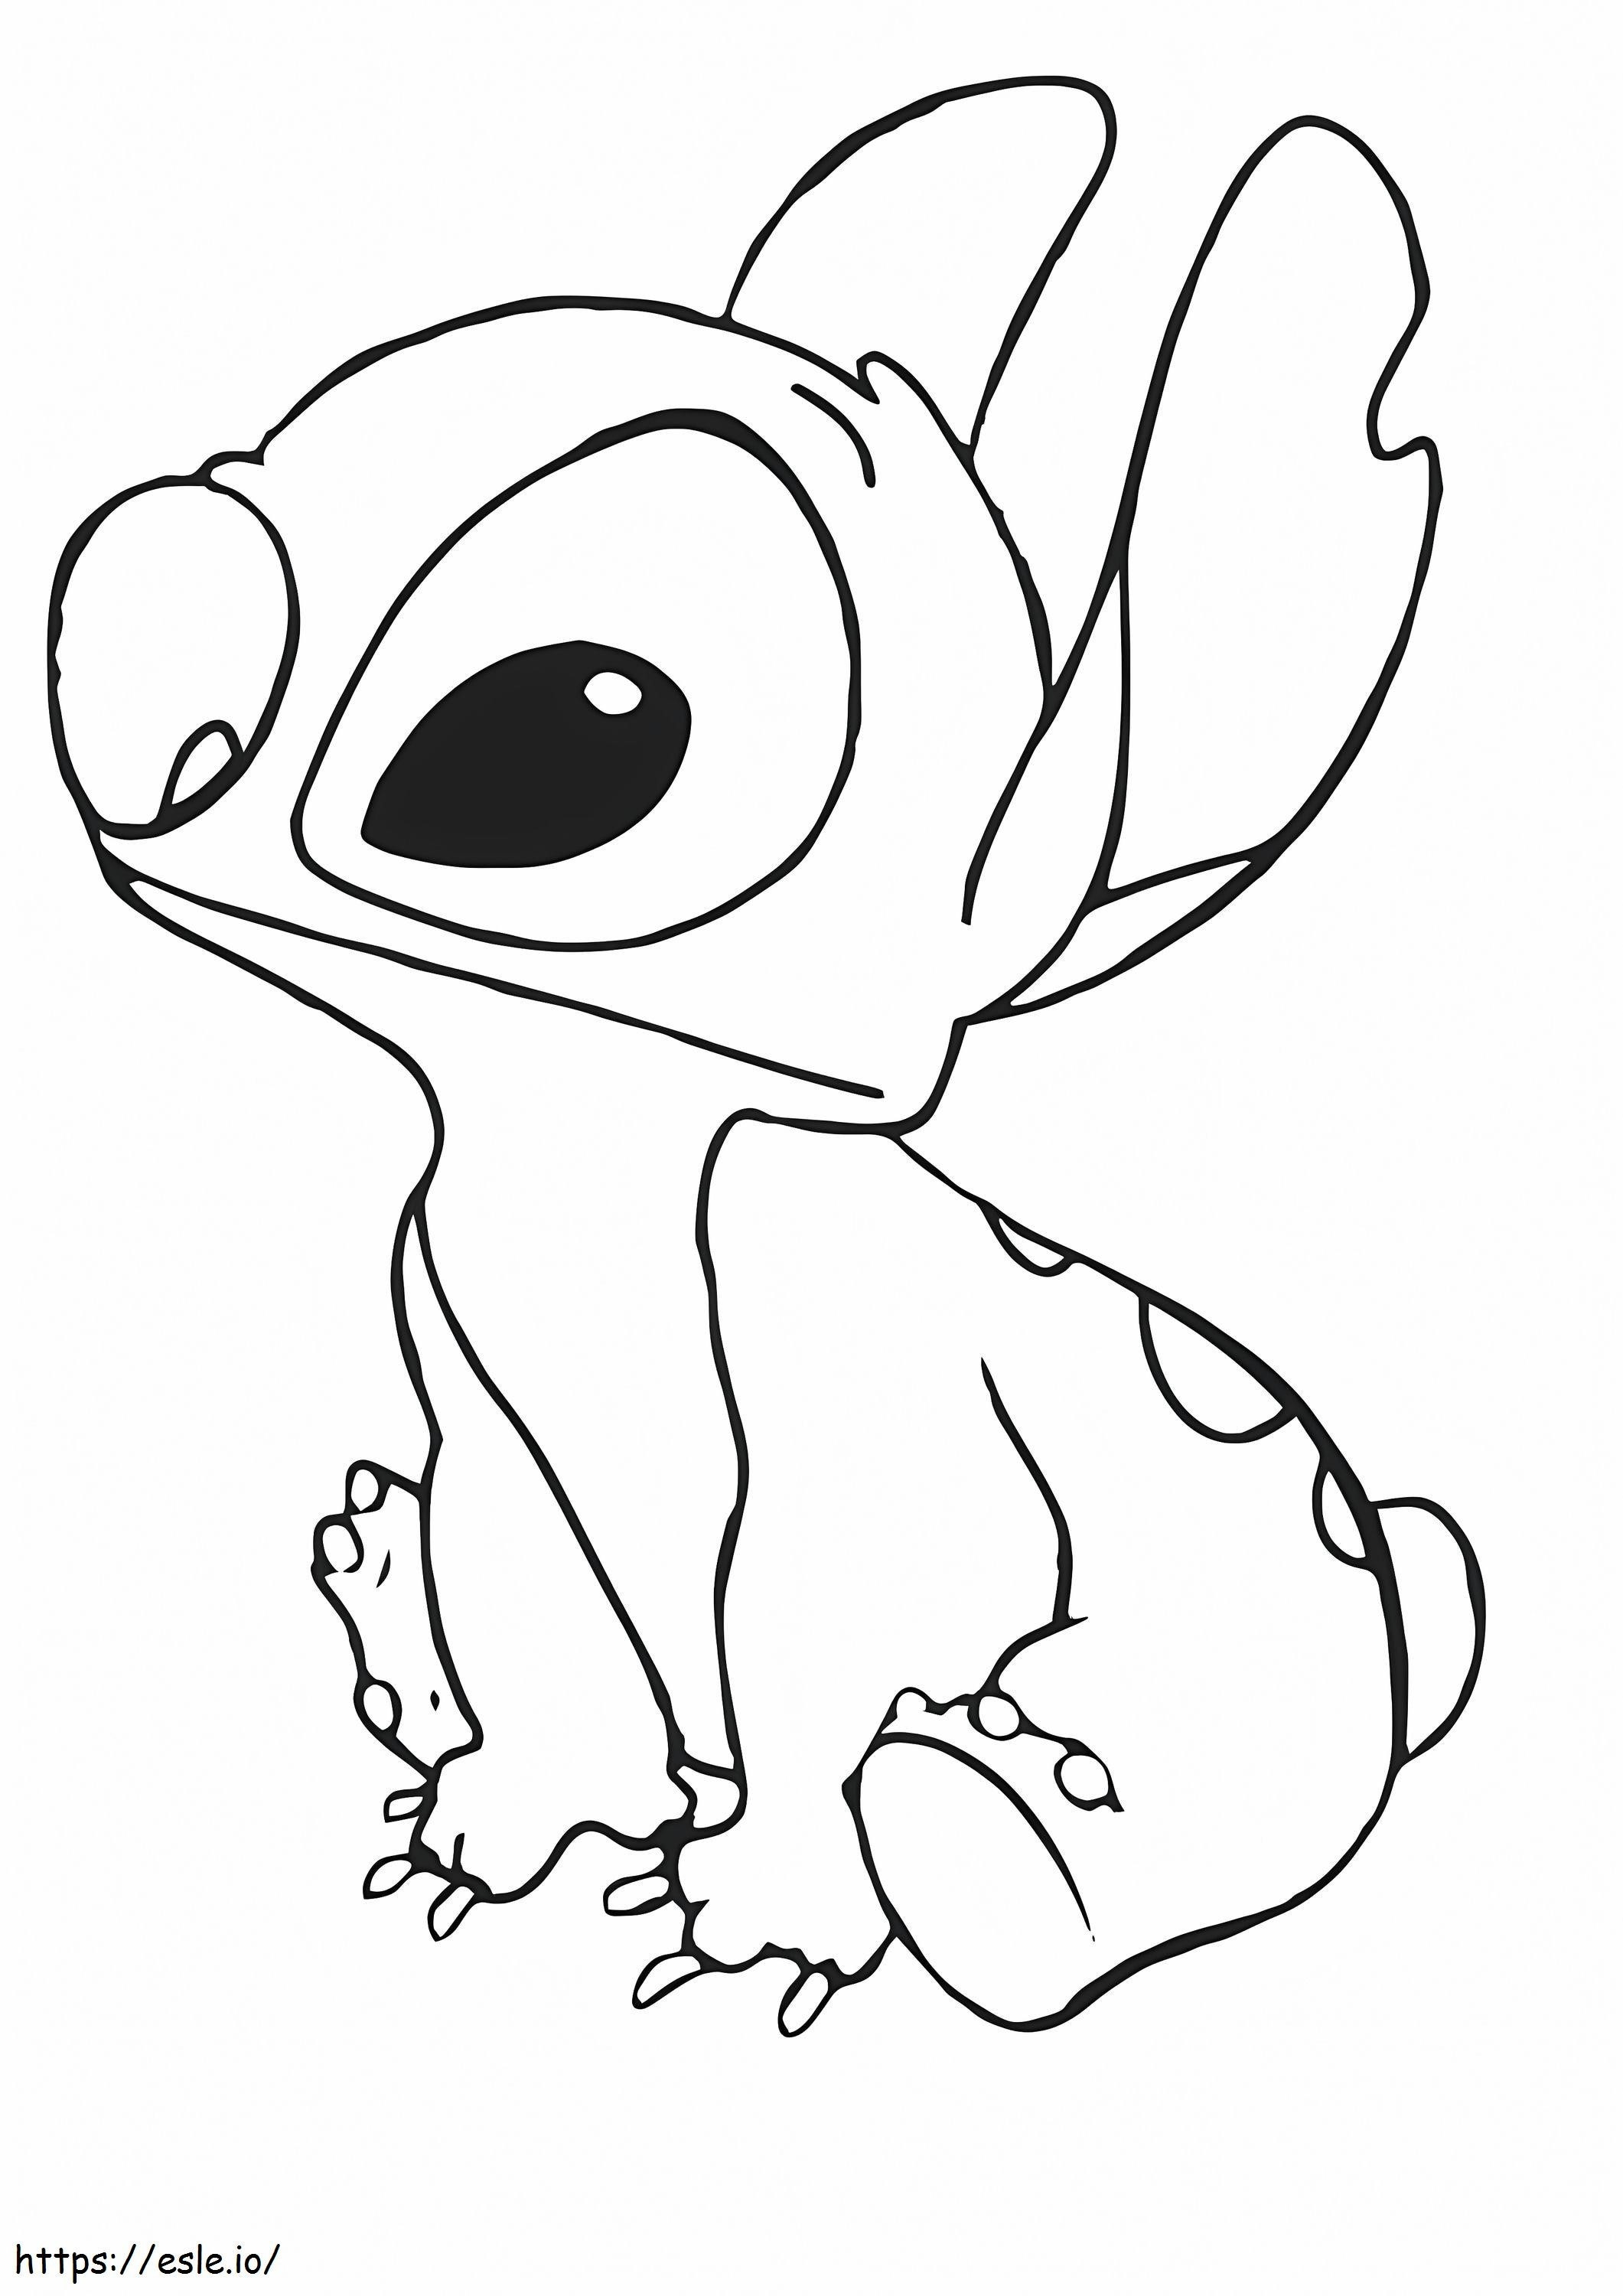 Simple Stitch coloring page